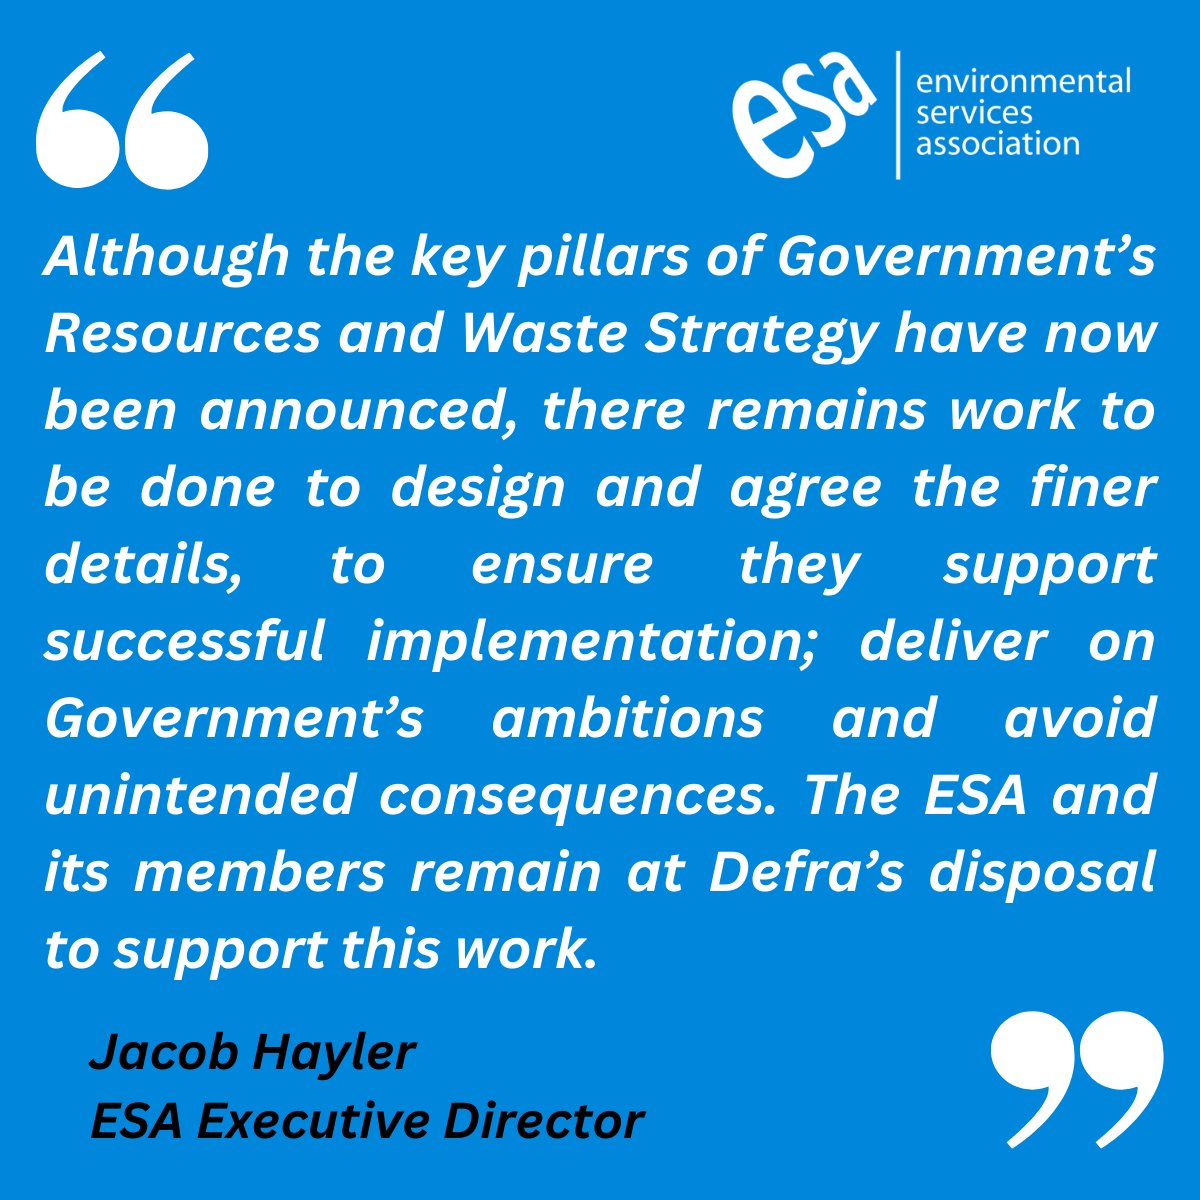 We welcome @SteveBarclay into his new role, and look forward to working with him and the new team @DefraGovUK to ensure they support the successful implementation of the #ResourcesAndWasteStrategy. Full quote from ESA ED Jacob Hayler below: